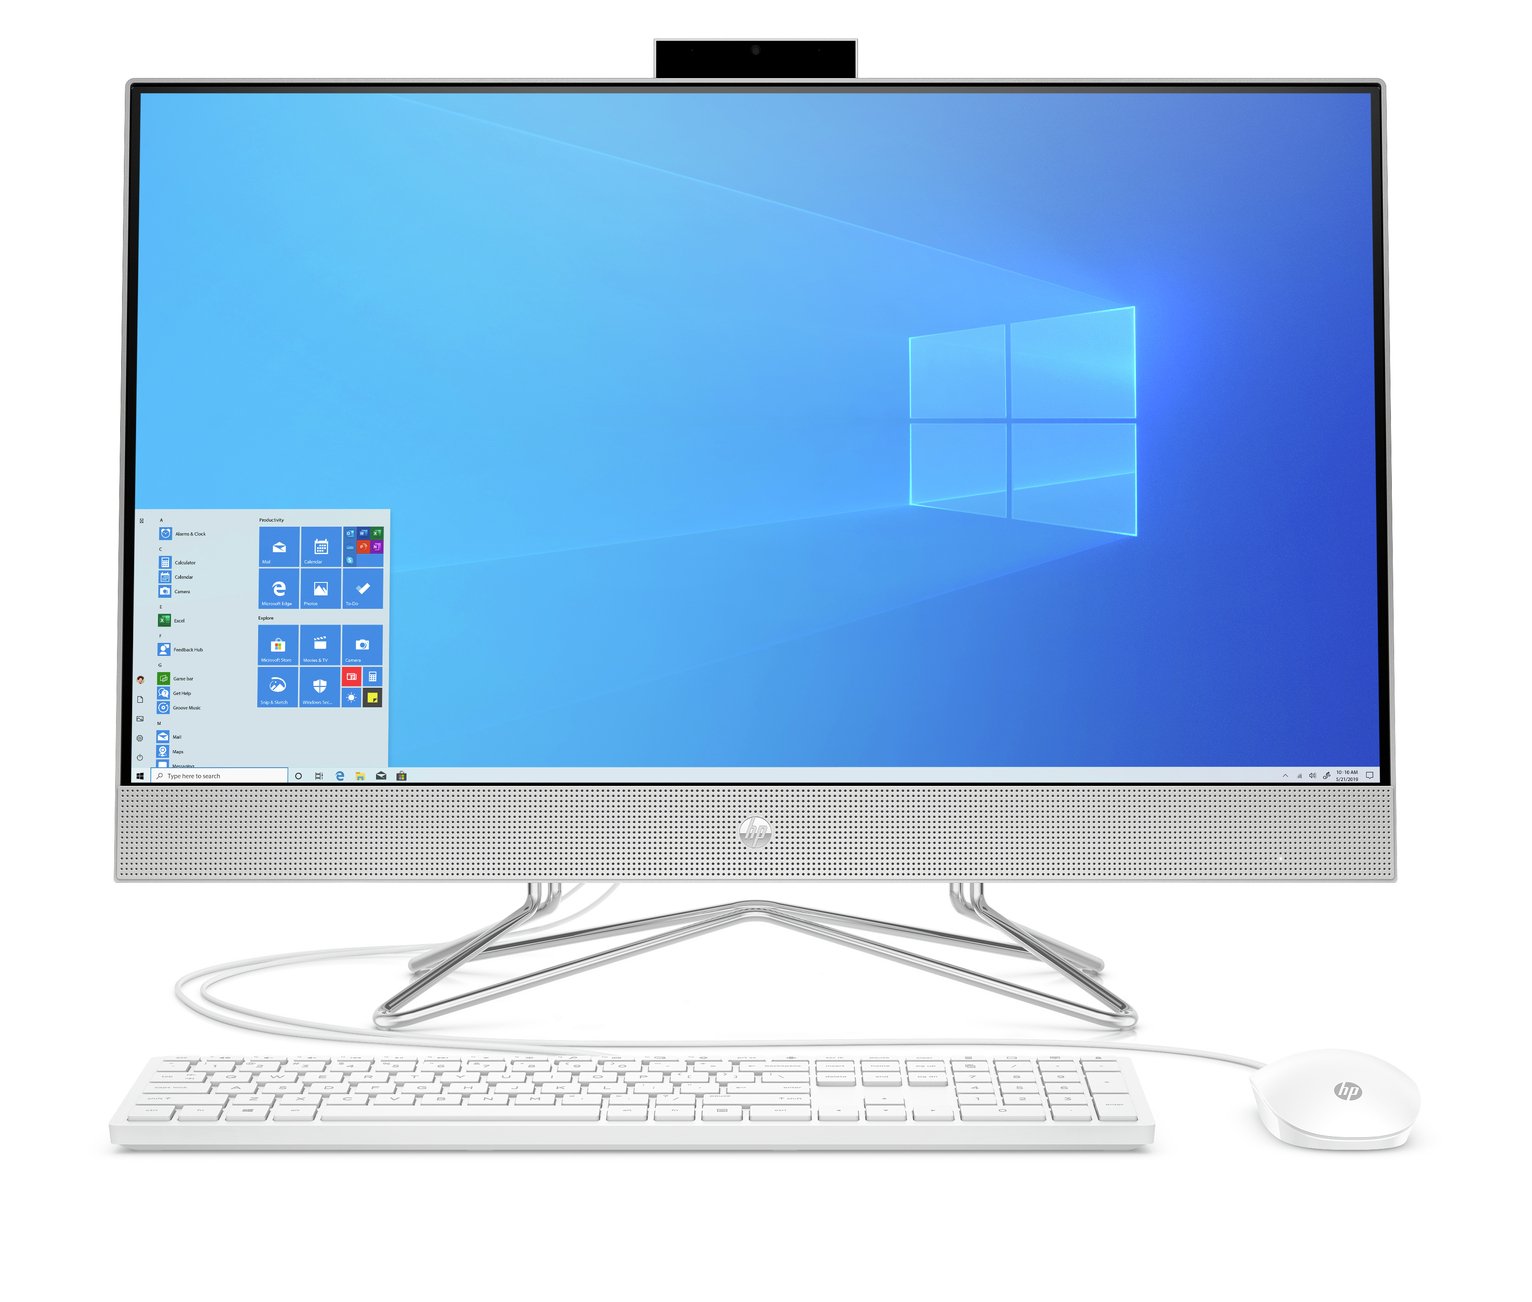 HP 27in i5 8GB 1TB 256GB FHD All-in-One PC Review